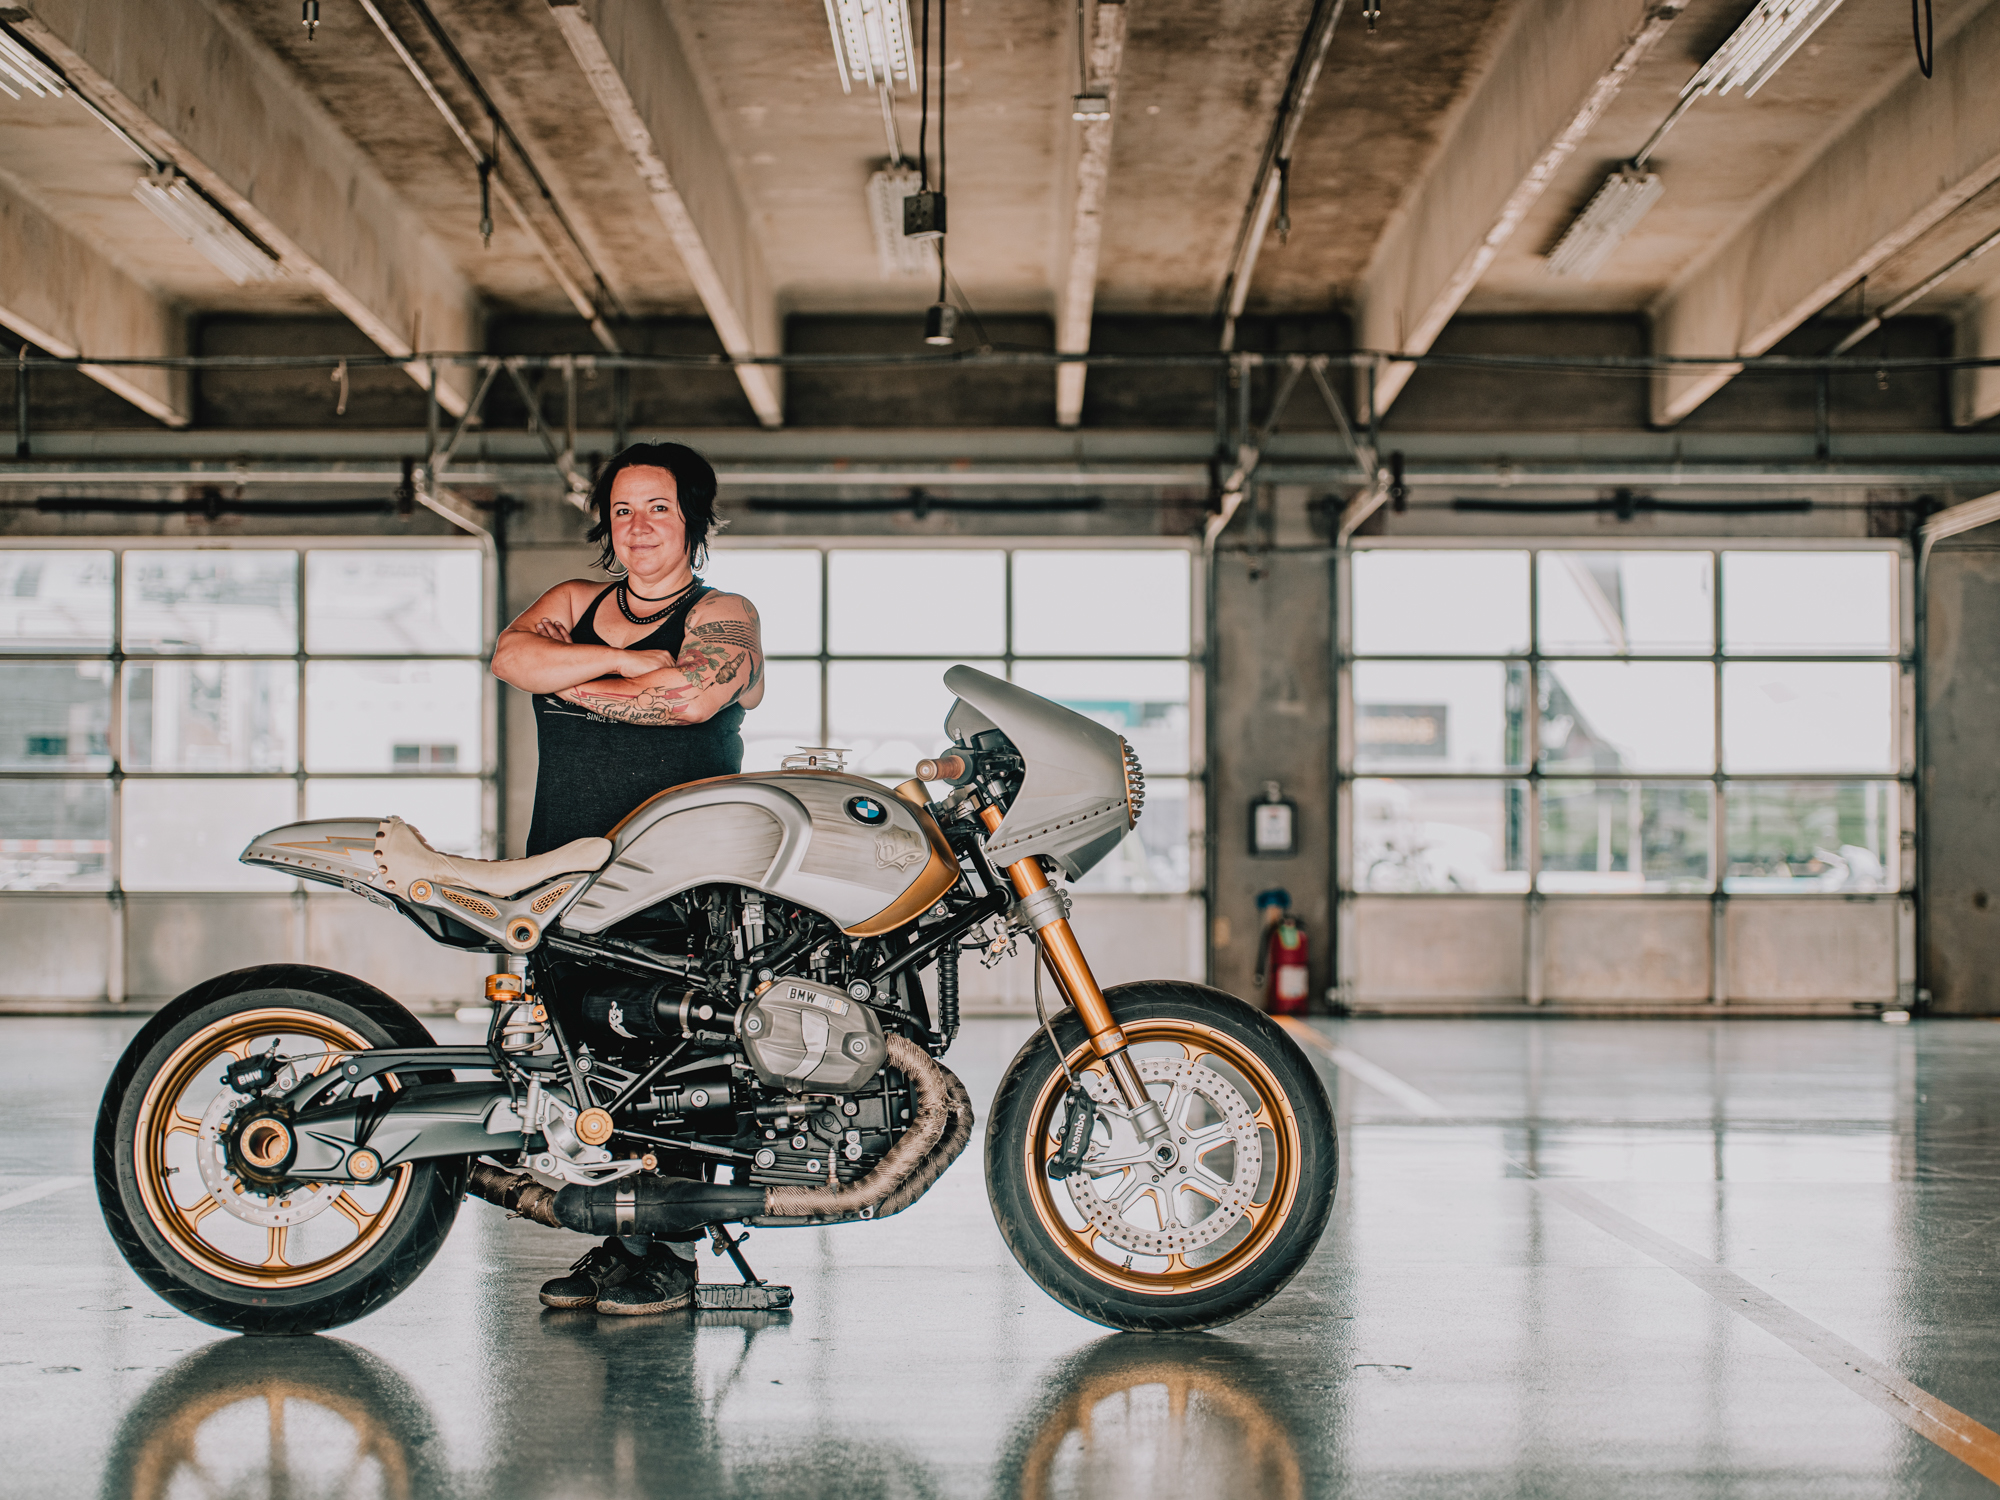 Women's Motorcycle Show 2021 - Theresa Contreras of Real Deal Revolution